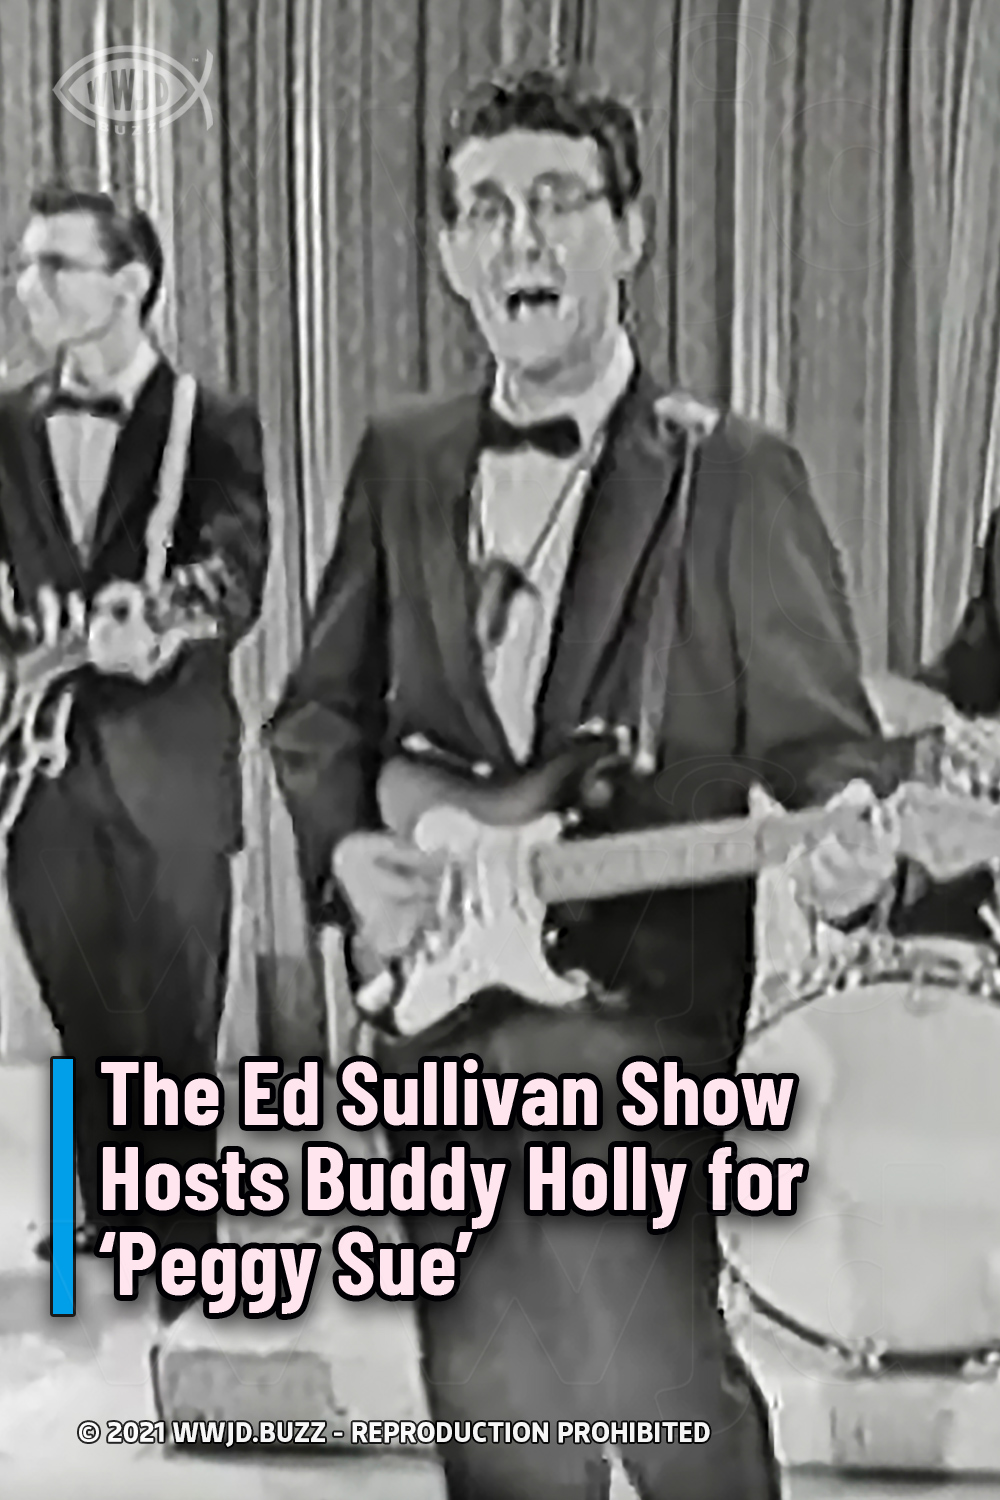 The Ed Sullivan Show Hosts Buddy Holly for ‘Peggy Sue’